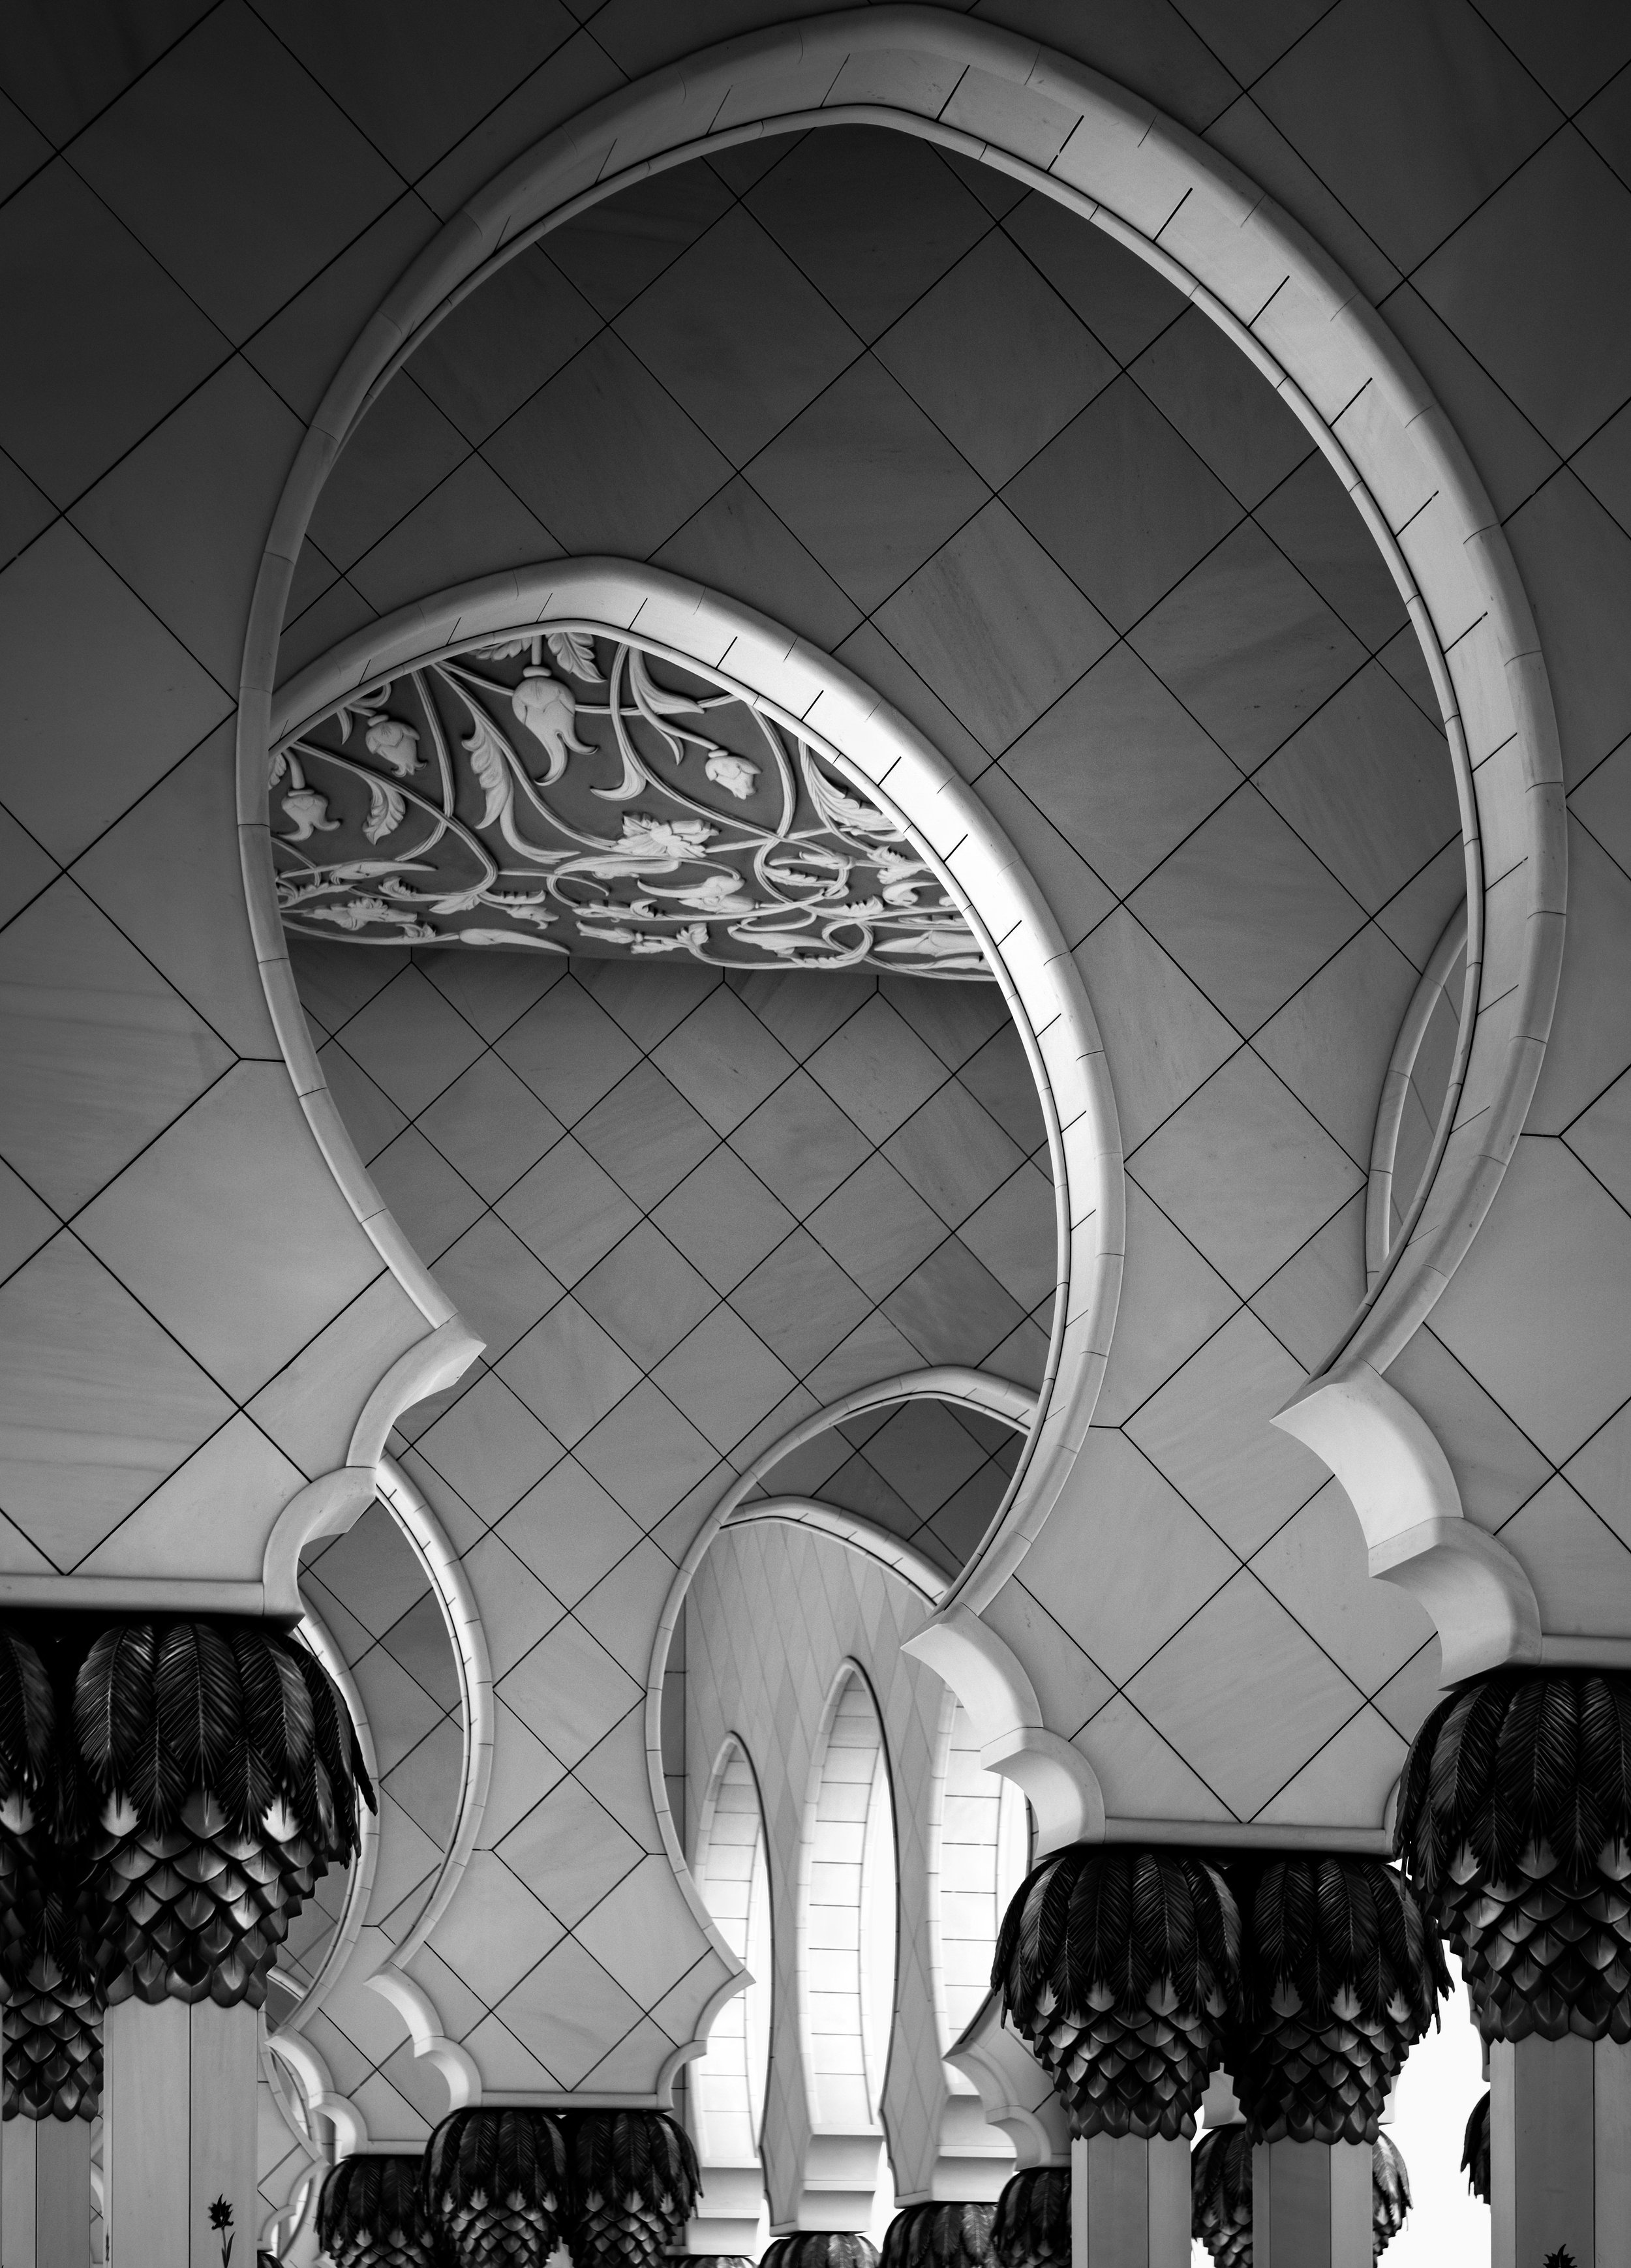 Arch shaped pillars of the Sheikh Zayed Grand Mosque of Abu Dhabi